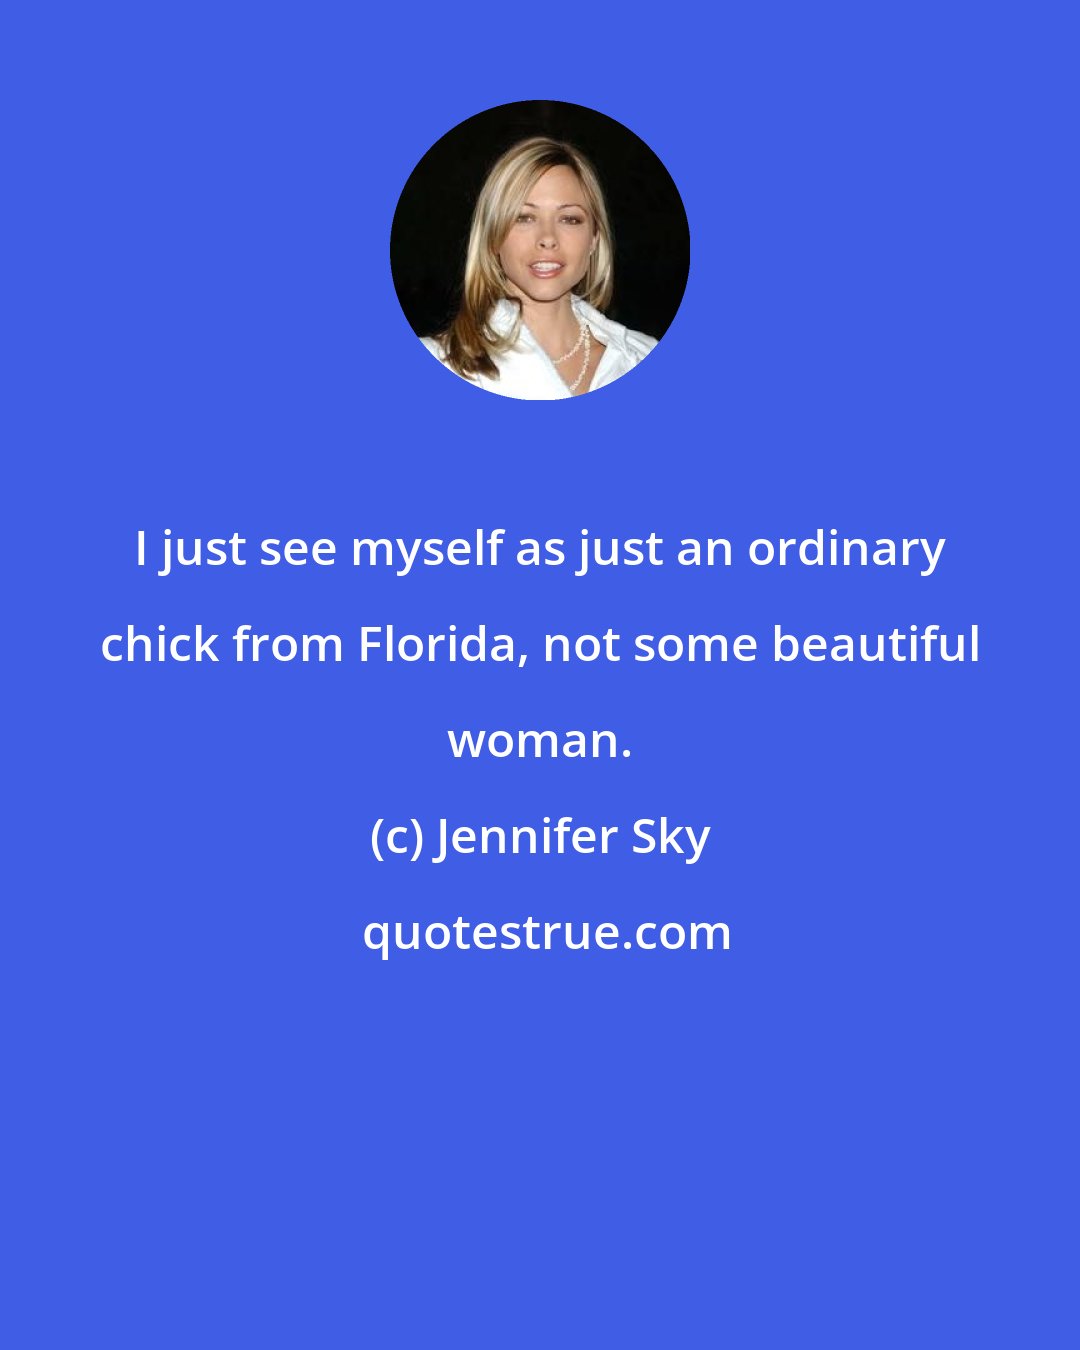 Jennifer Sky: I just see myself as just an ordinary chick from Florida, not some beautiful woman.